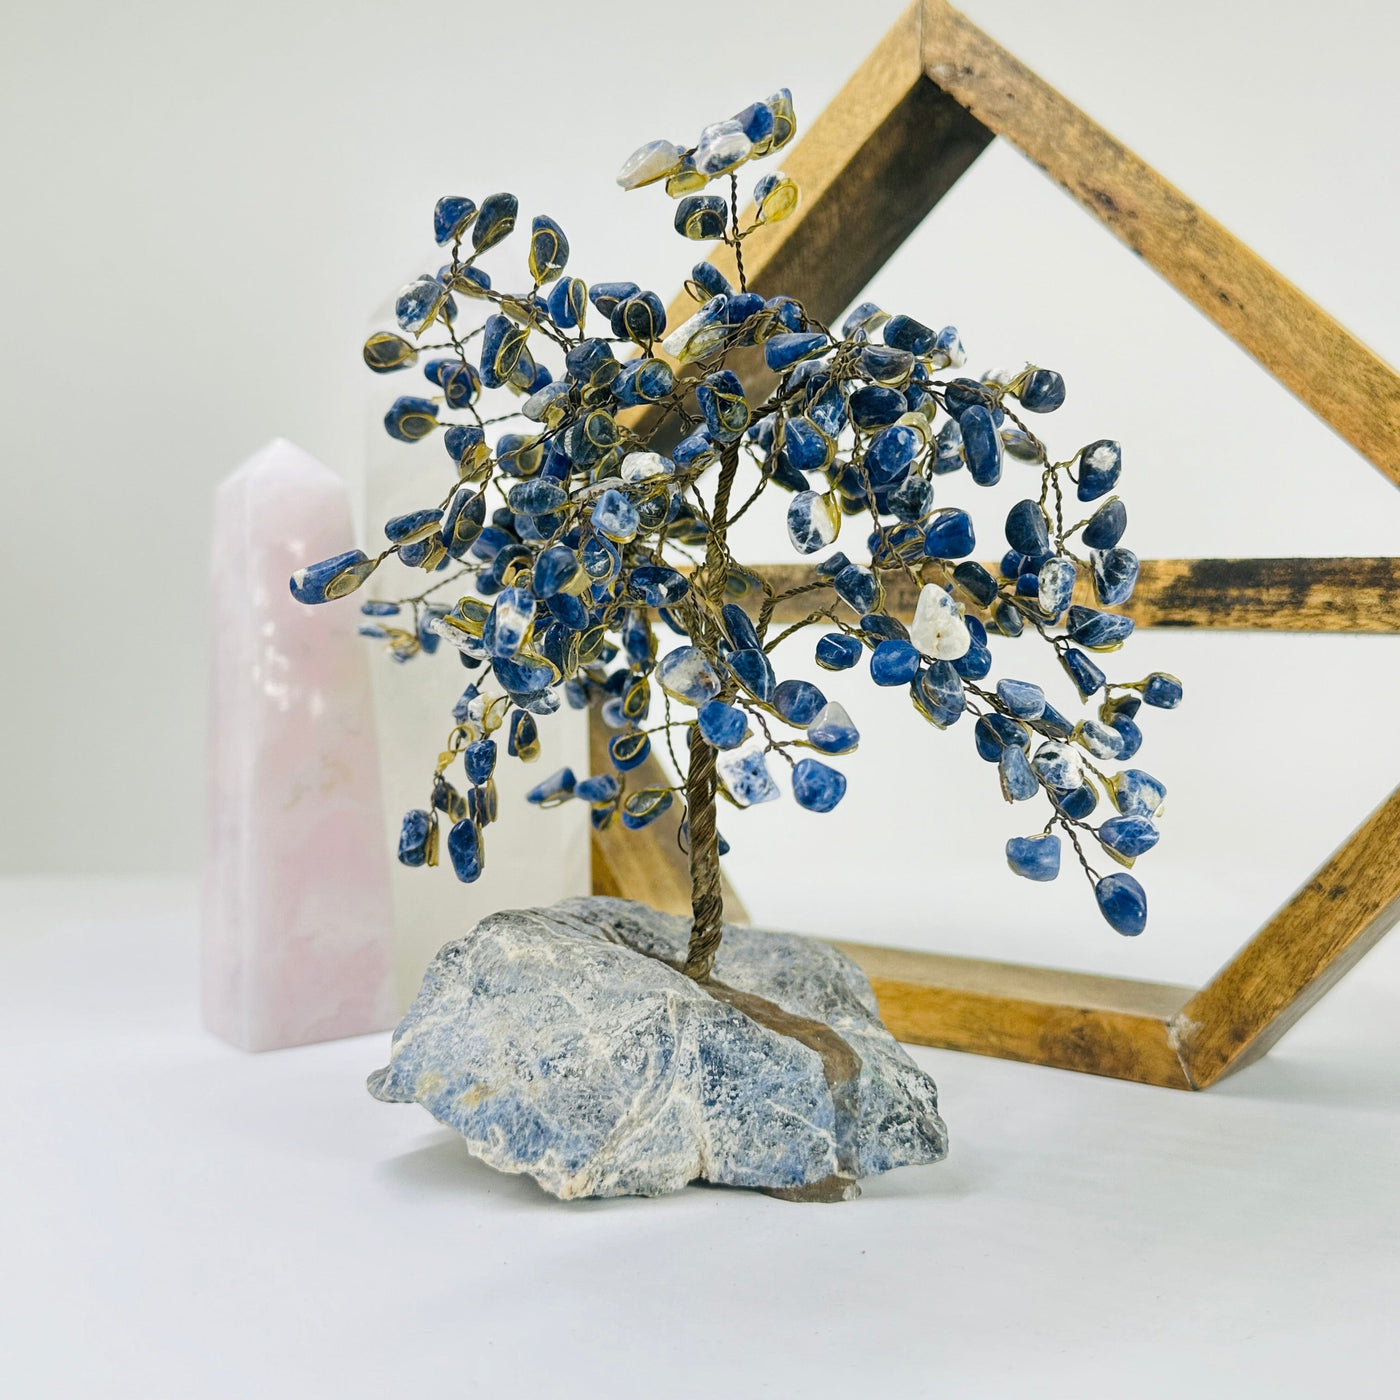 sodalite tree with decorations in the background